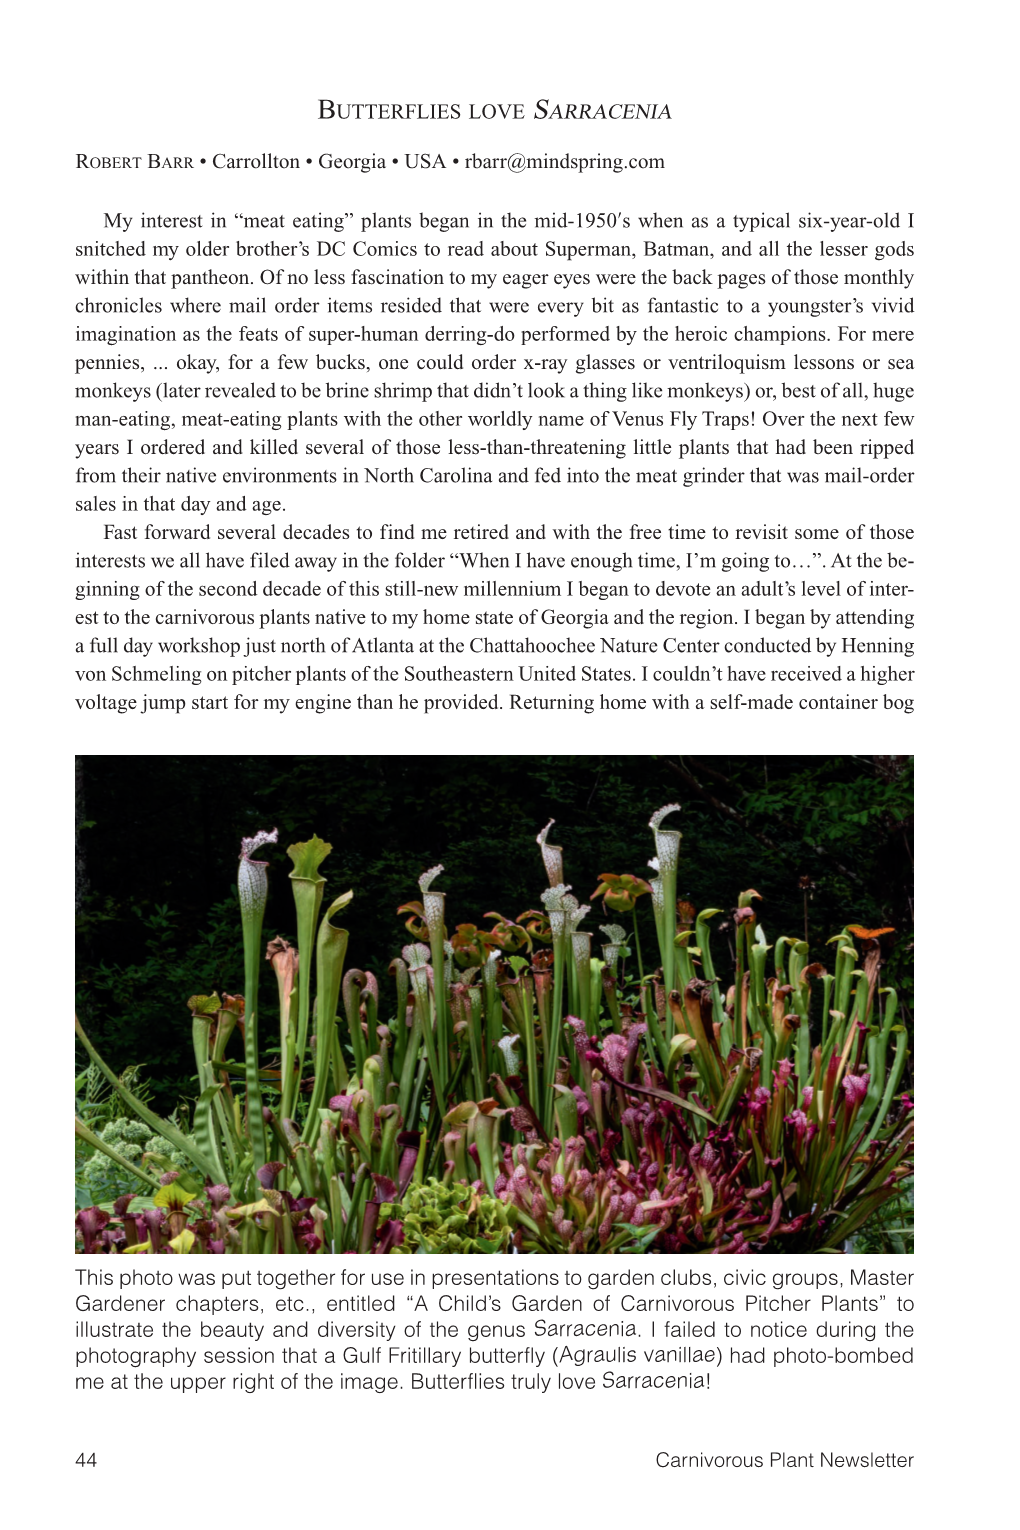 Carnivorous Plant Newsletter Vol 49 No 1 March 2020